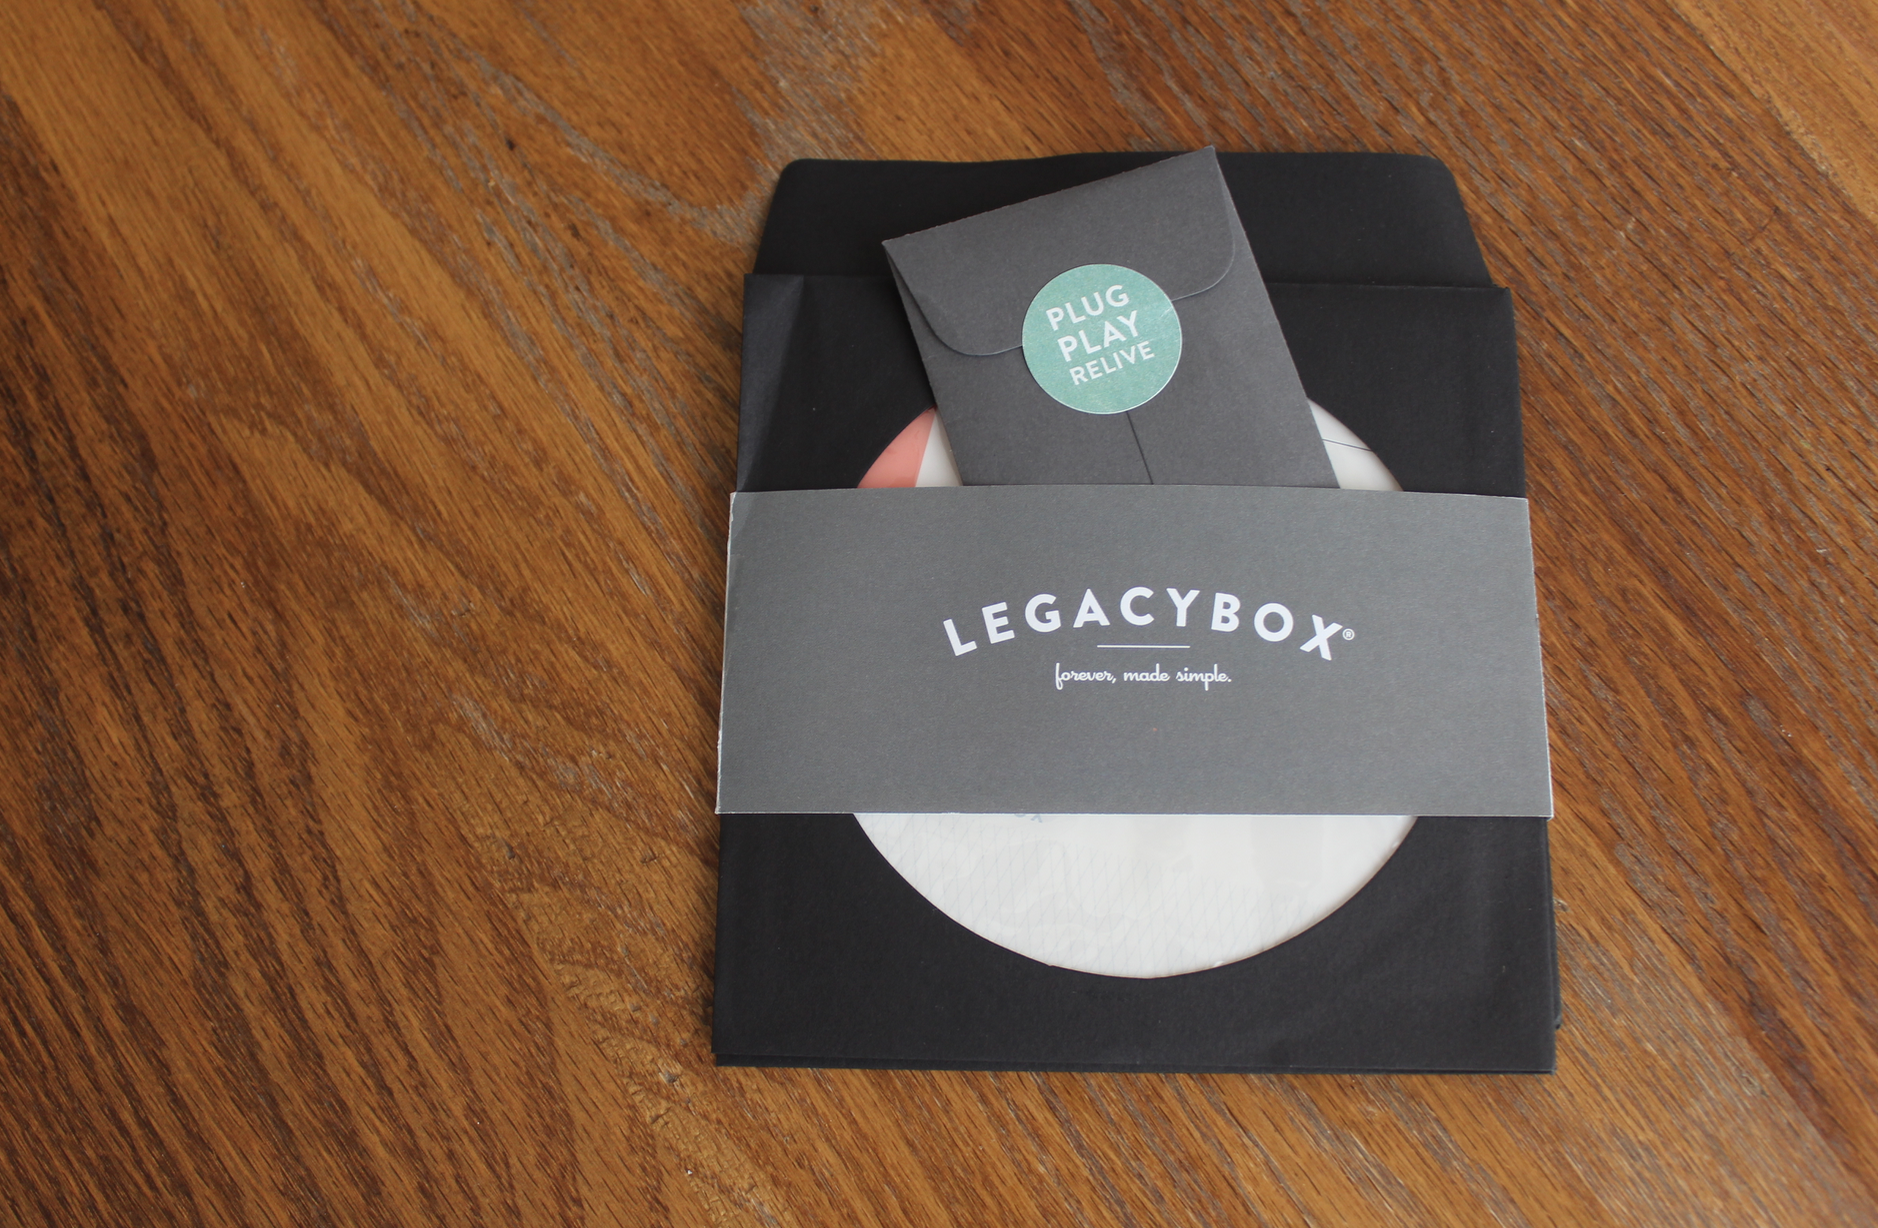 Legacybox products